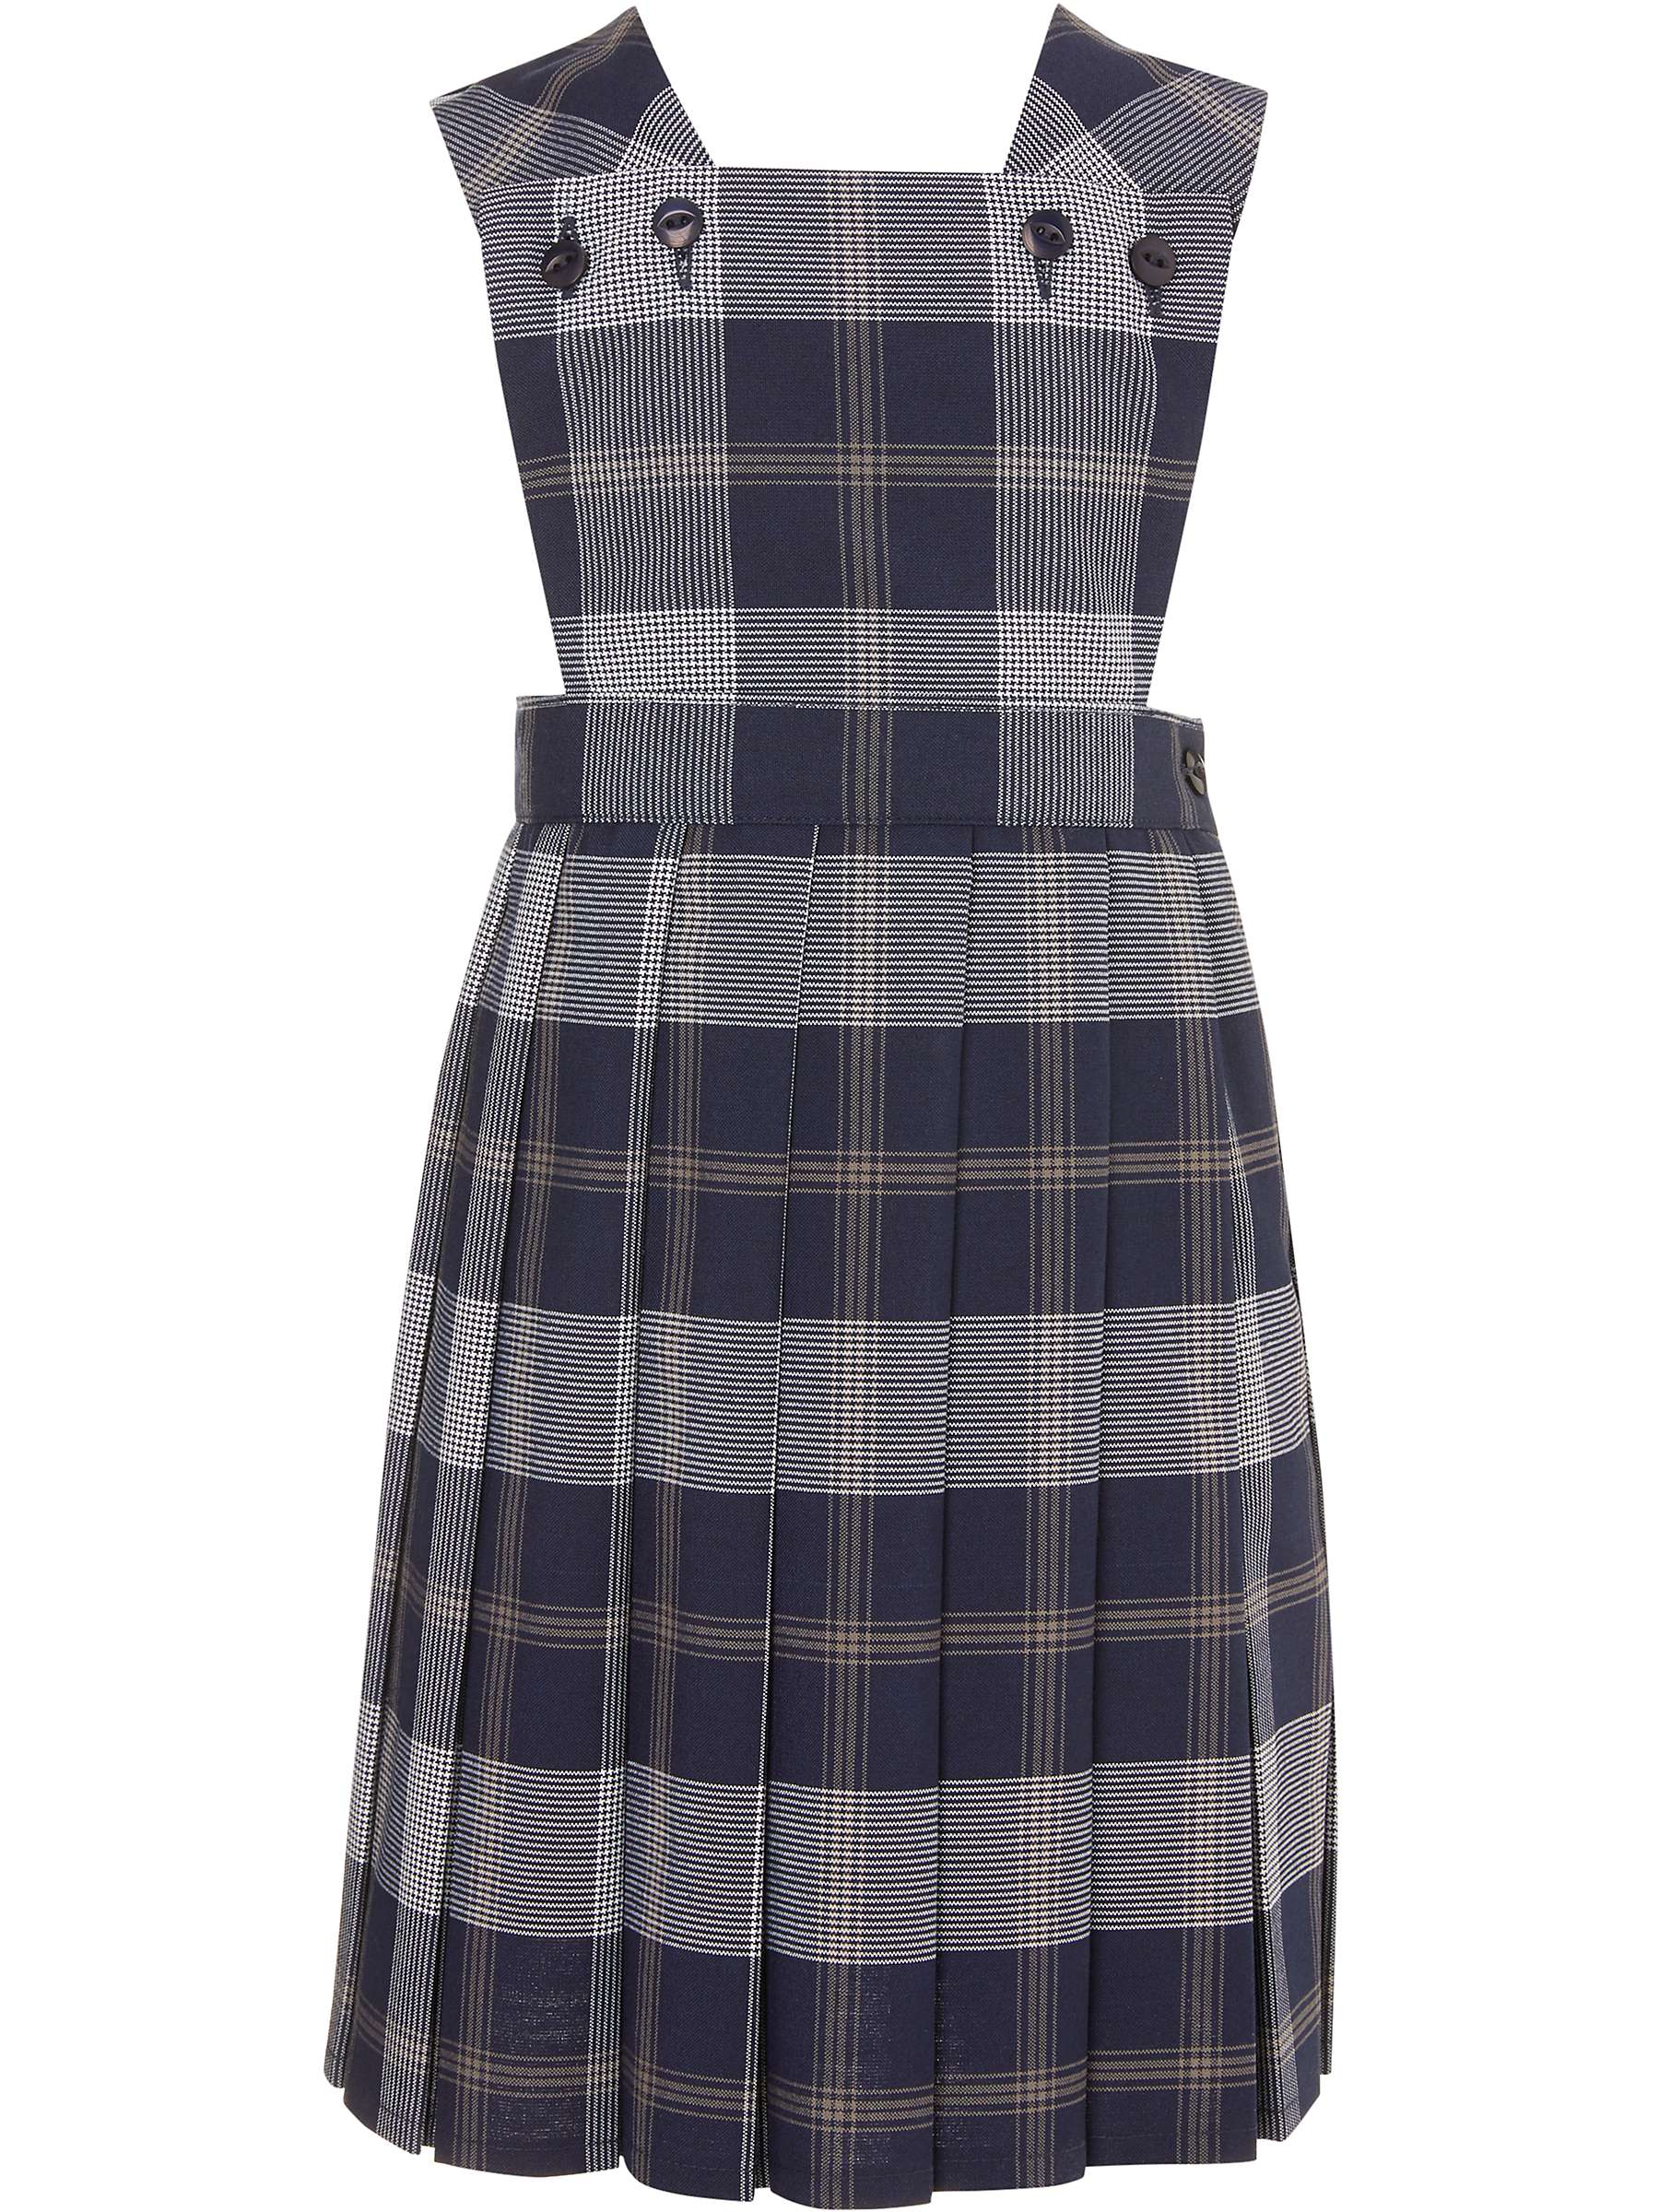 Buy Chigwell School Girls' Pinafore, Blue/White Online at johnlewis.com